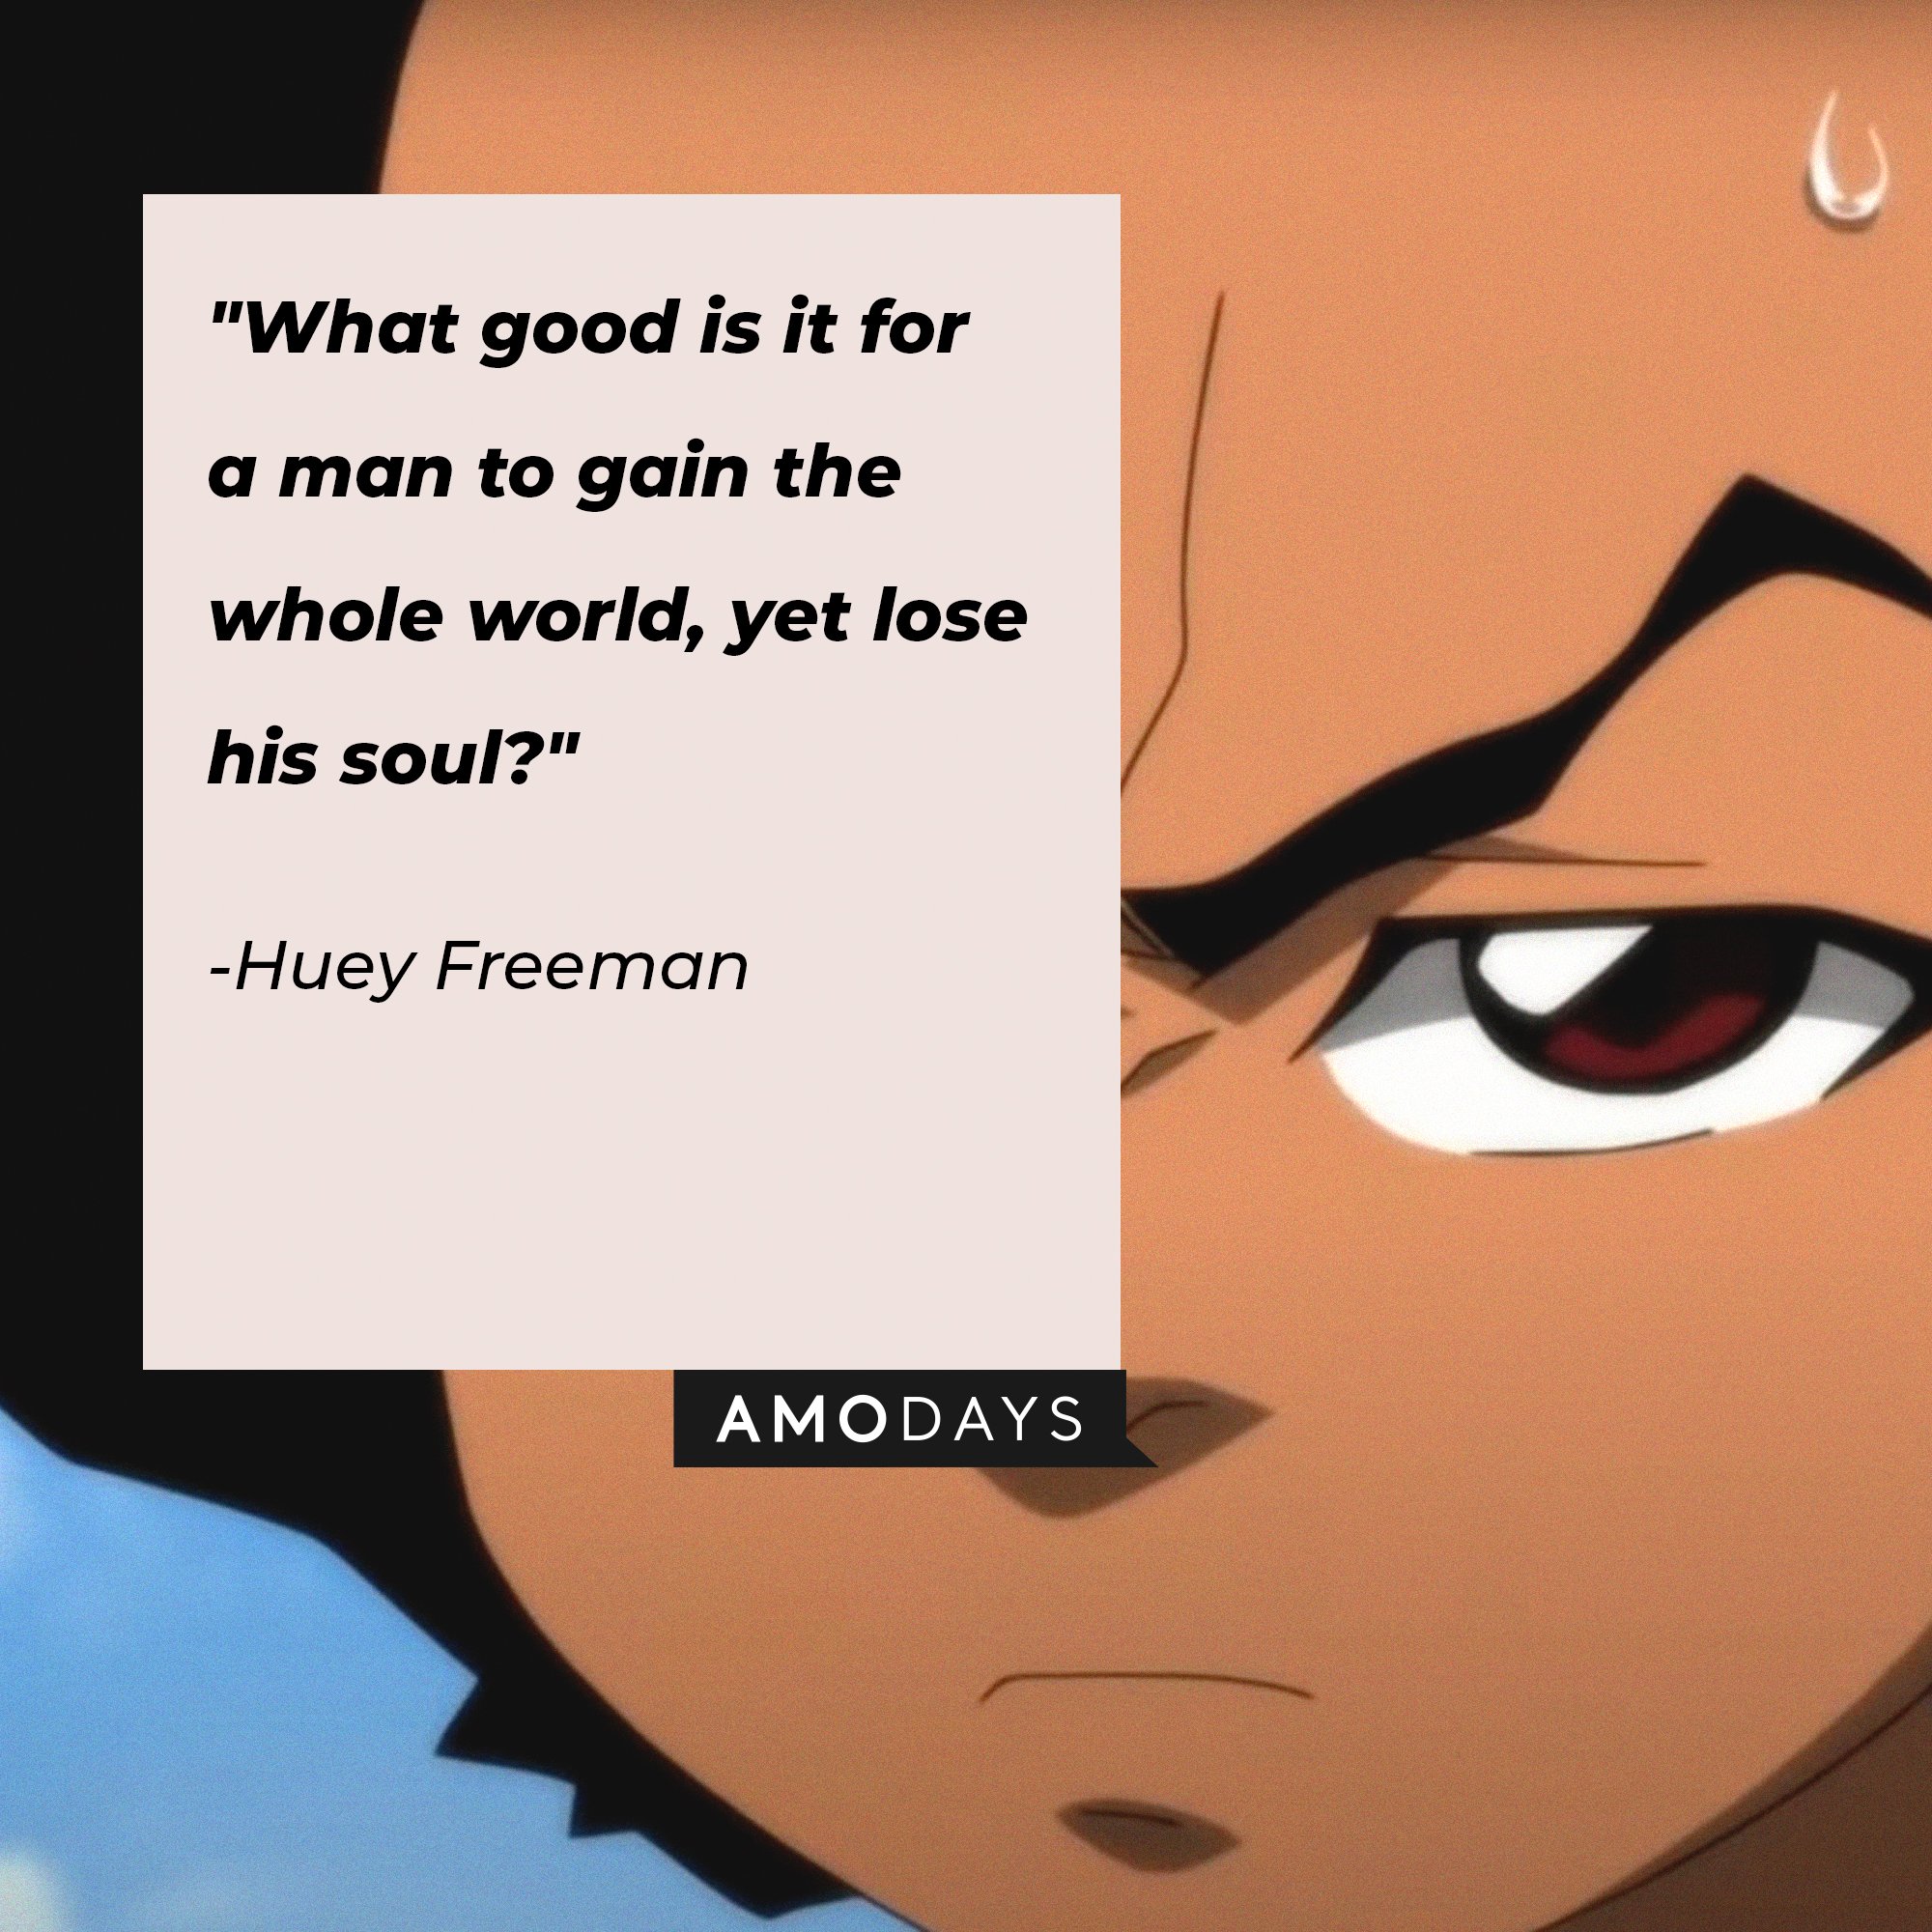 Huey Freeman's quote: "What good is it for a man to gain the whole world, yet lose his soul?" | Image: AmoDays